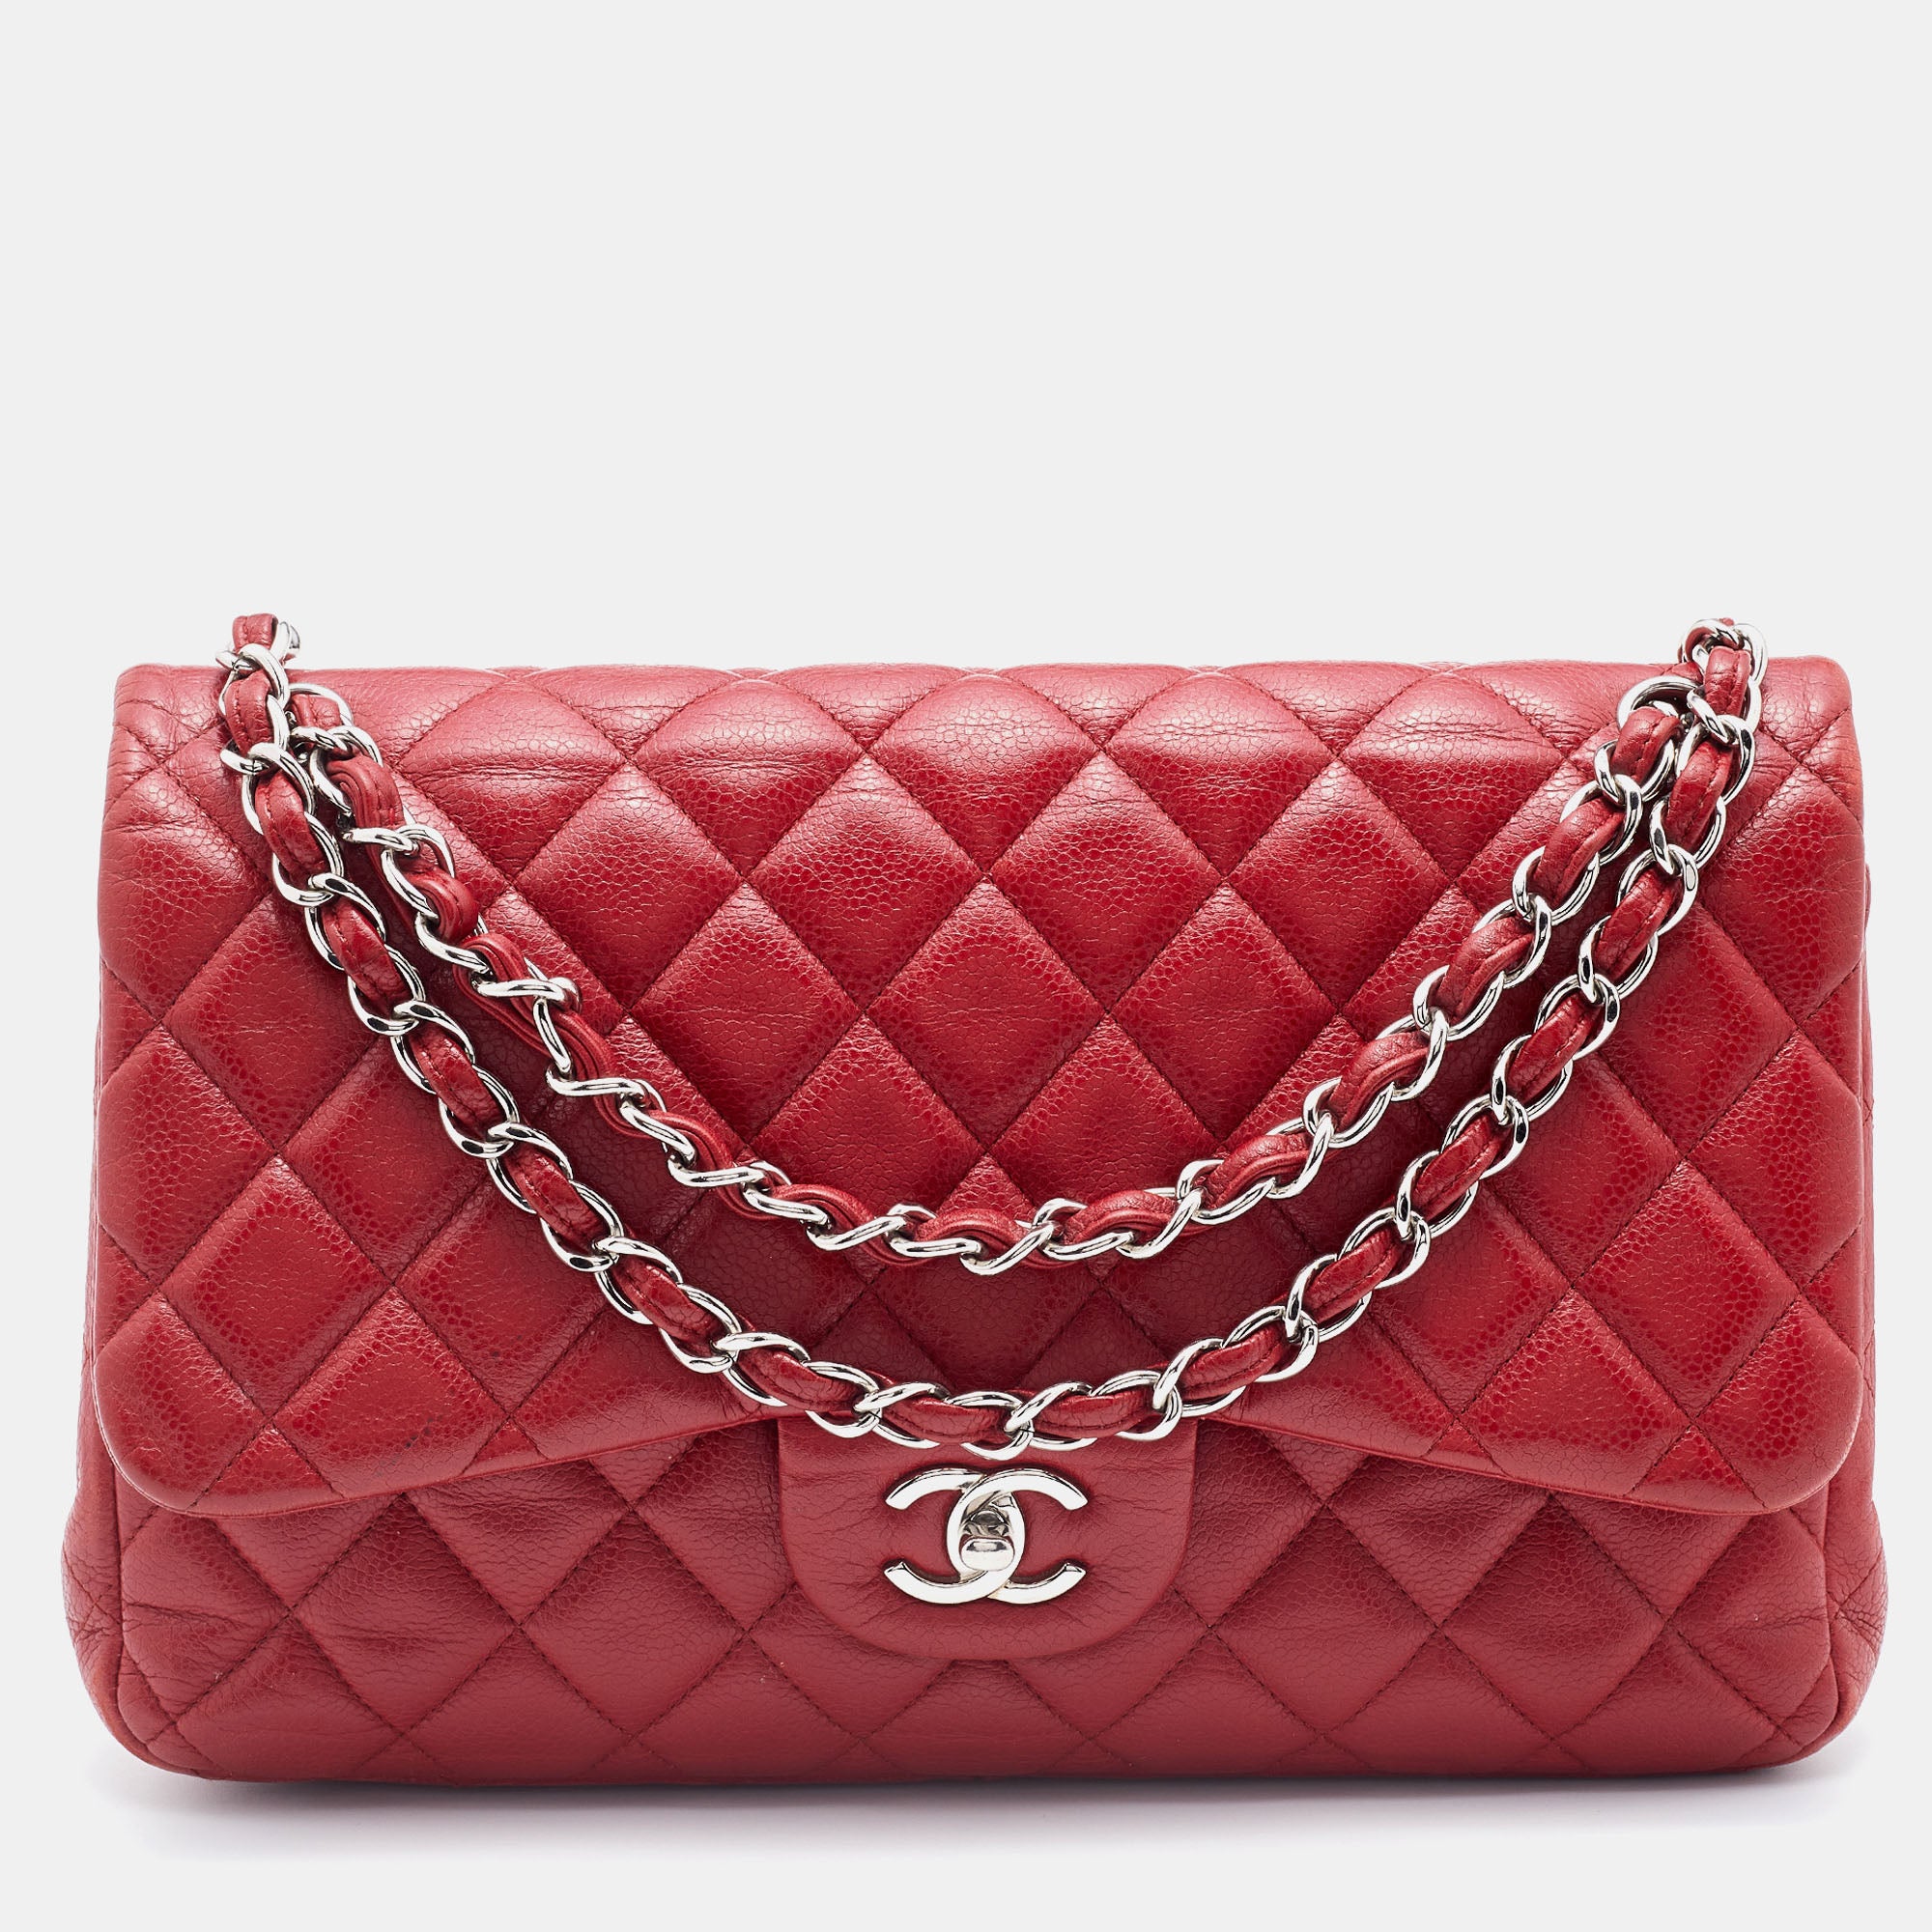 Pin by audiosoup on Style | Fashion, Red chanel, Chanel classic red